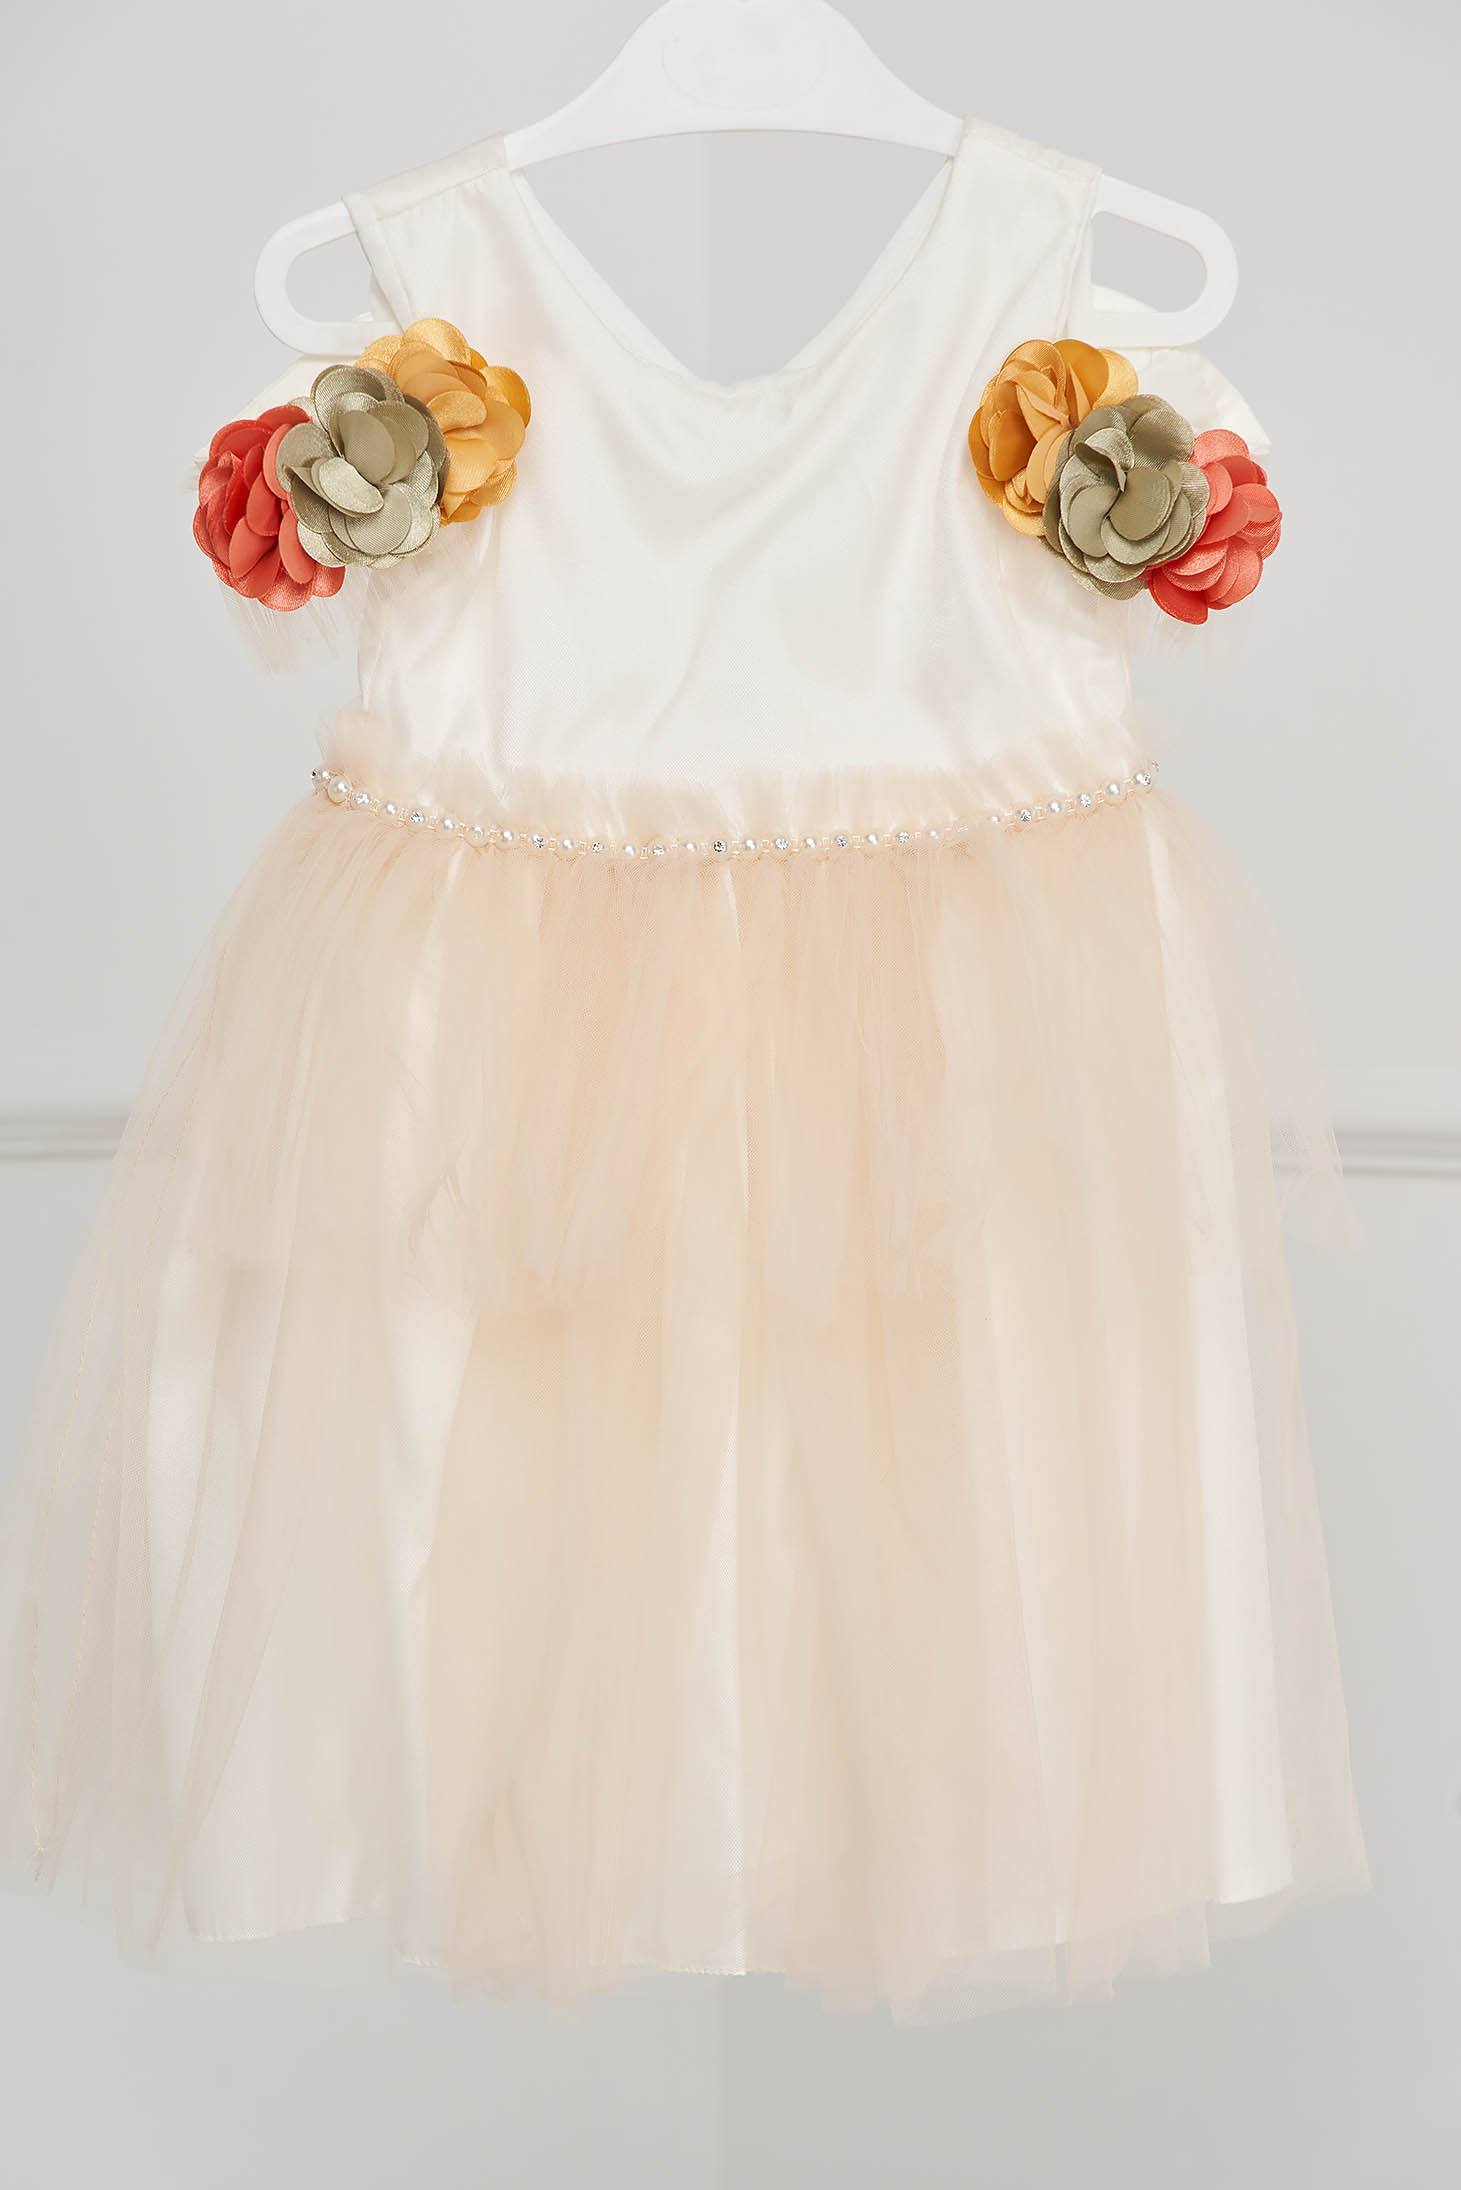 Ivory dress from tulle with small beads embellished details with raised flowers